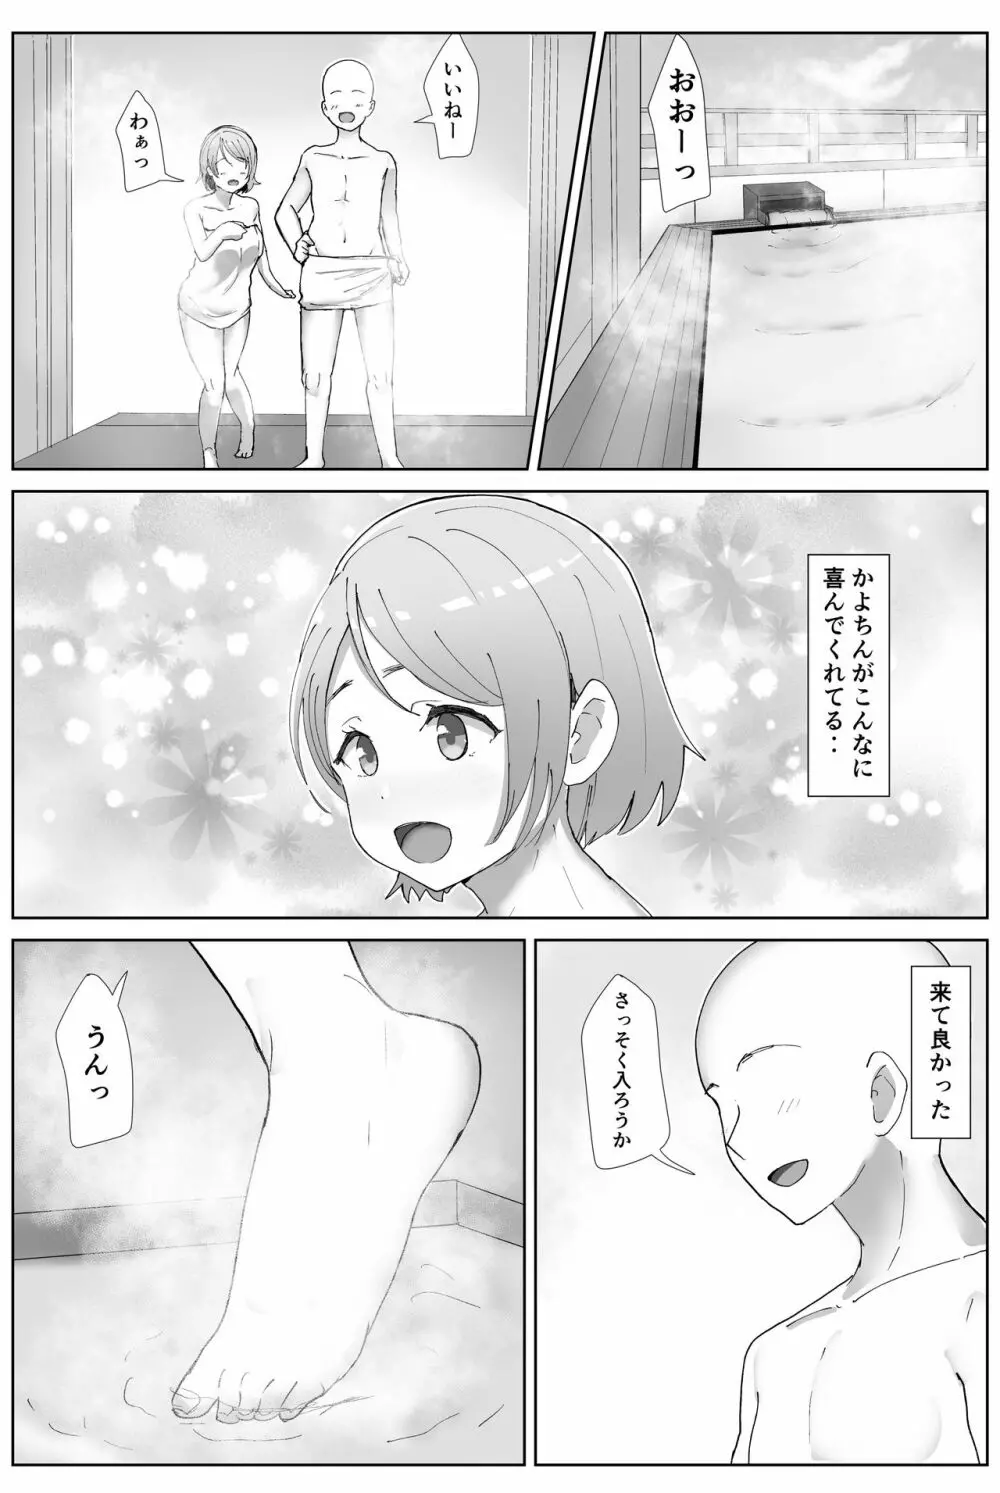 e-rn fanbox short love live doujinshi collection - page36